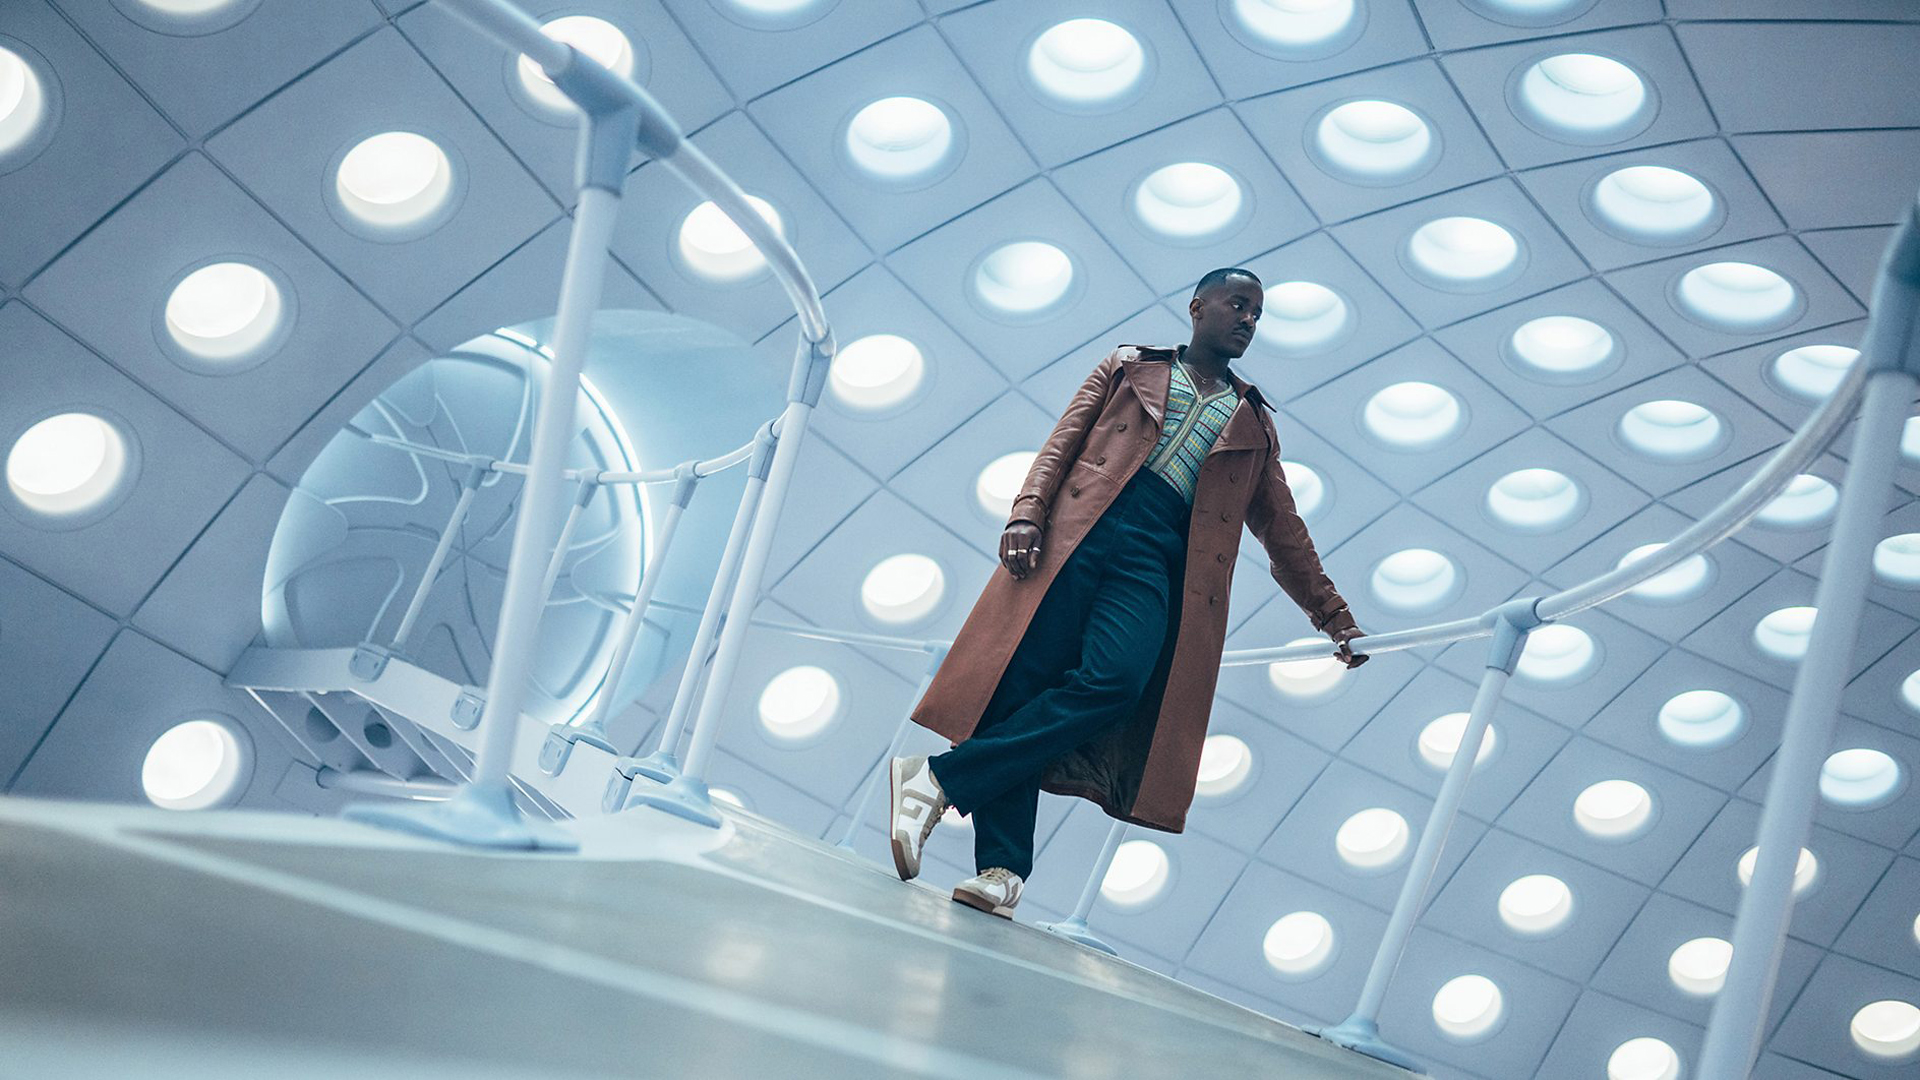 A tilted press image of Ncuti Gatwa's 15th Doctor standing in the TARDIS in Doctor Who season 14